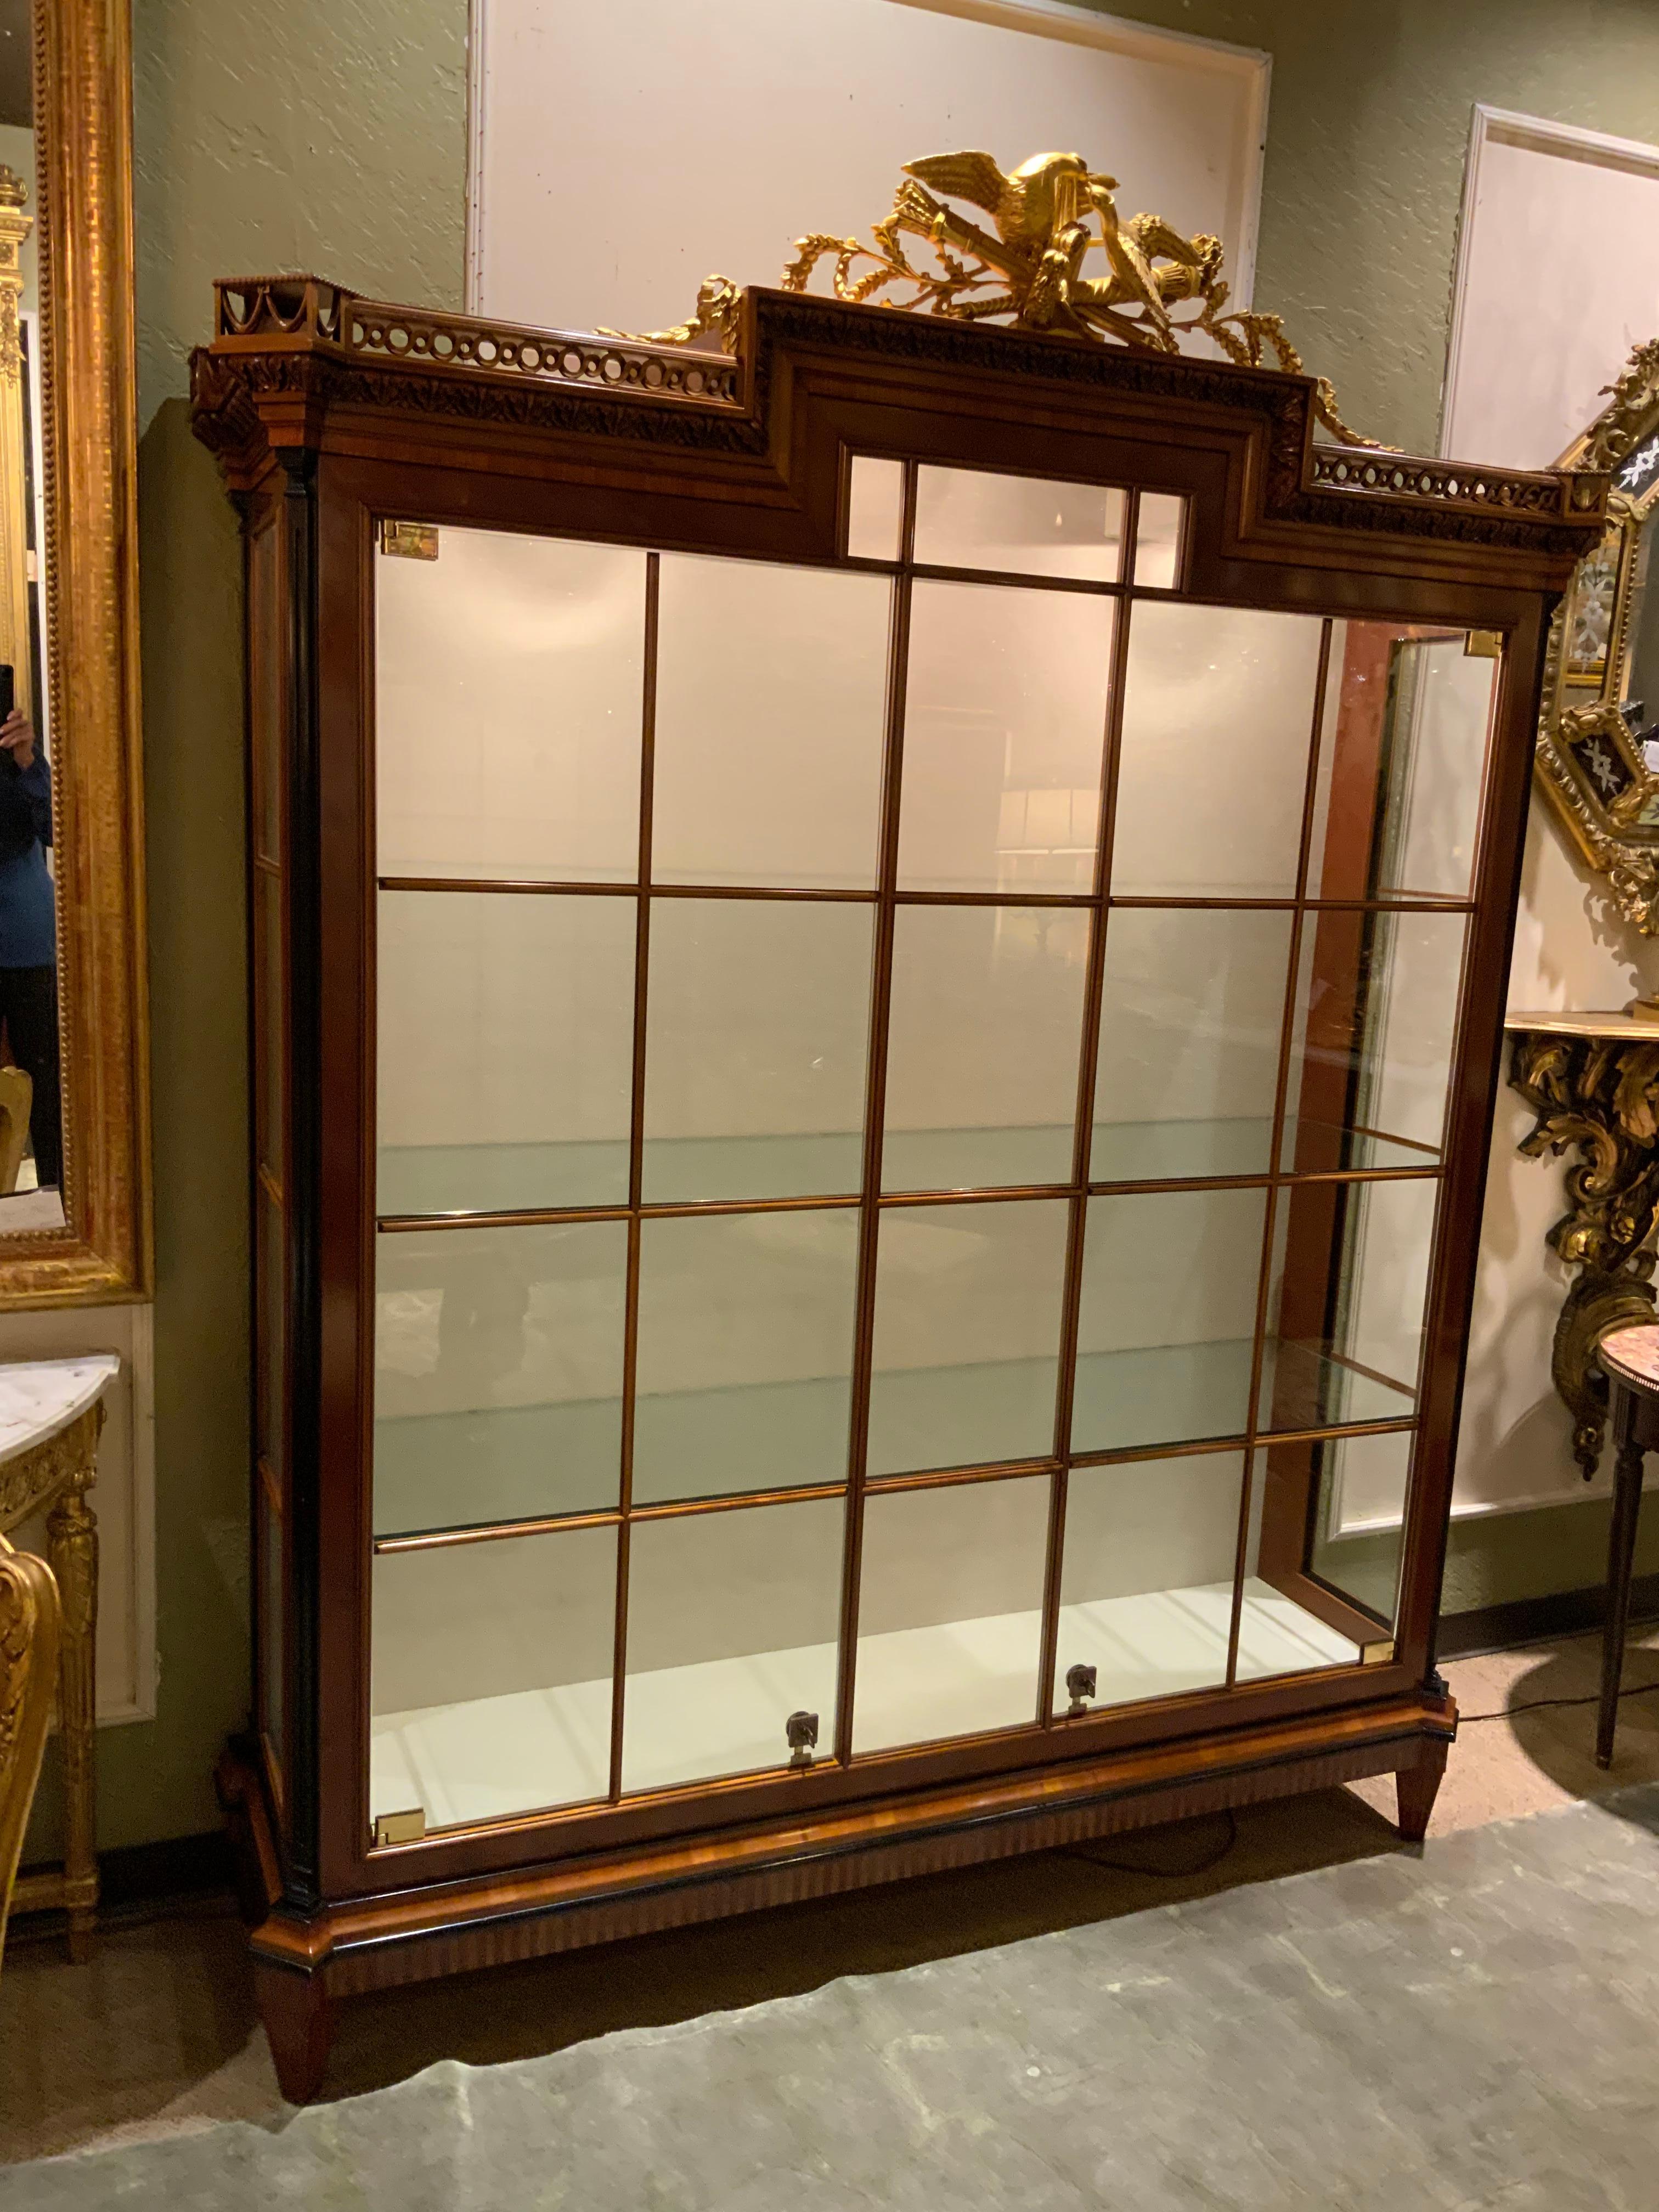 Exceptional quality cabinet that has beautiful detail and a hand carved gold leaf crown.
Made of yew wood and cherrywood with ebony trim. The crown depicts doves with
A torch and quiver. The cabinet has three glass shelves.